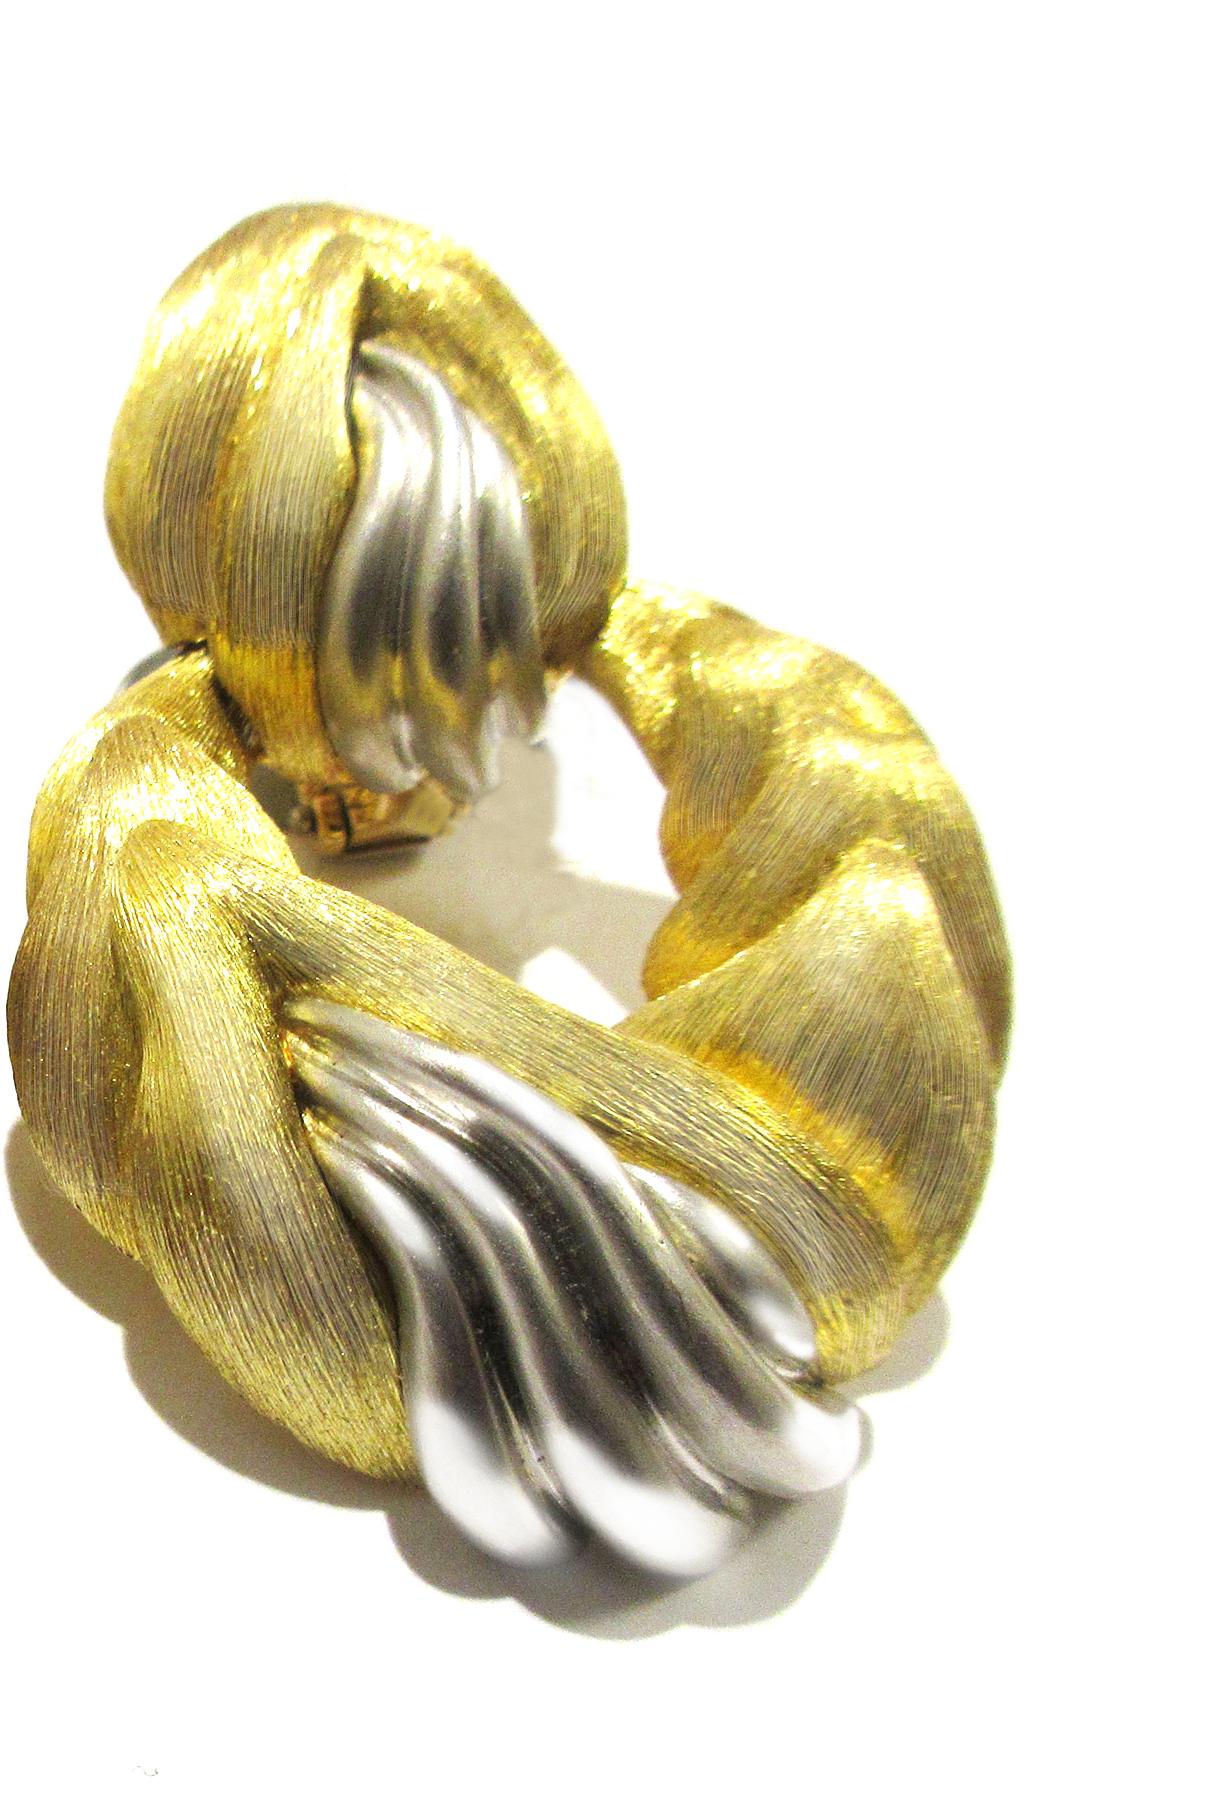 18kt., composed of brushed gold bombé wavy chevrons, with inserts of tapered platinum ribs, signed 'Dunay, no. B1615' with maker's mark, approximately dwts.